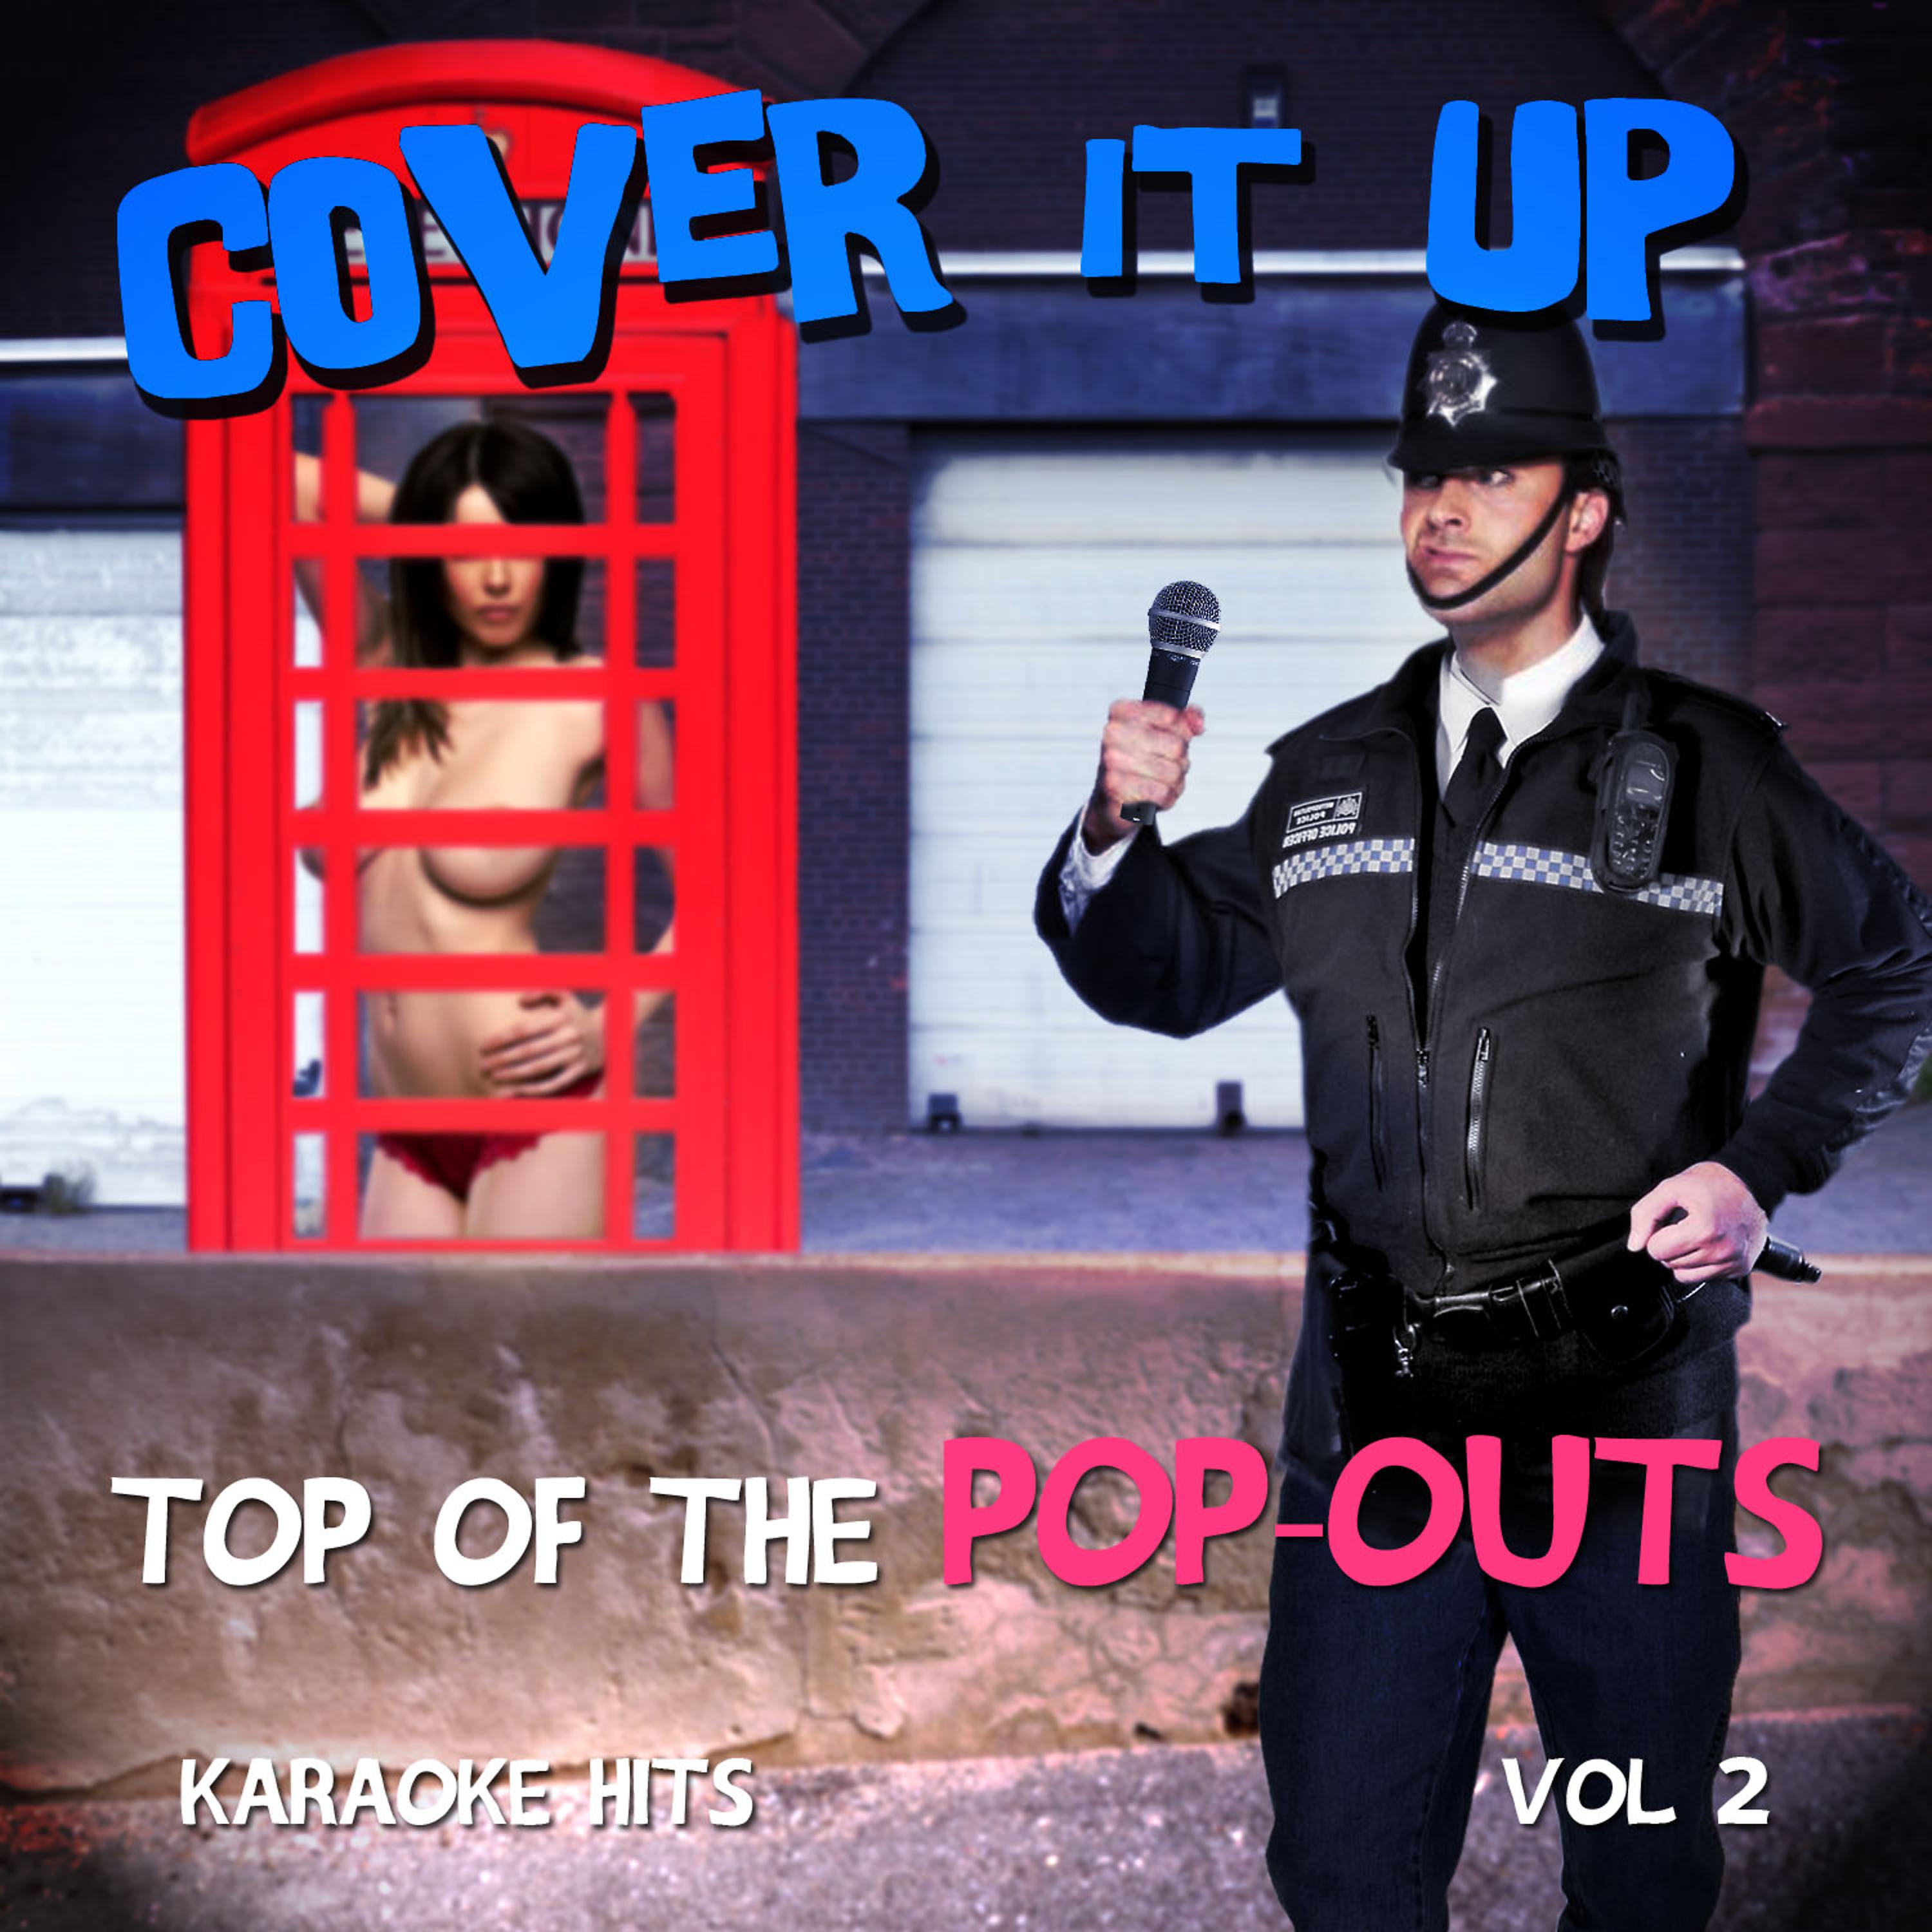 Постер альбома Cover It up, Top of the Pop-Outs - Karaoke Hits, Vol. 2